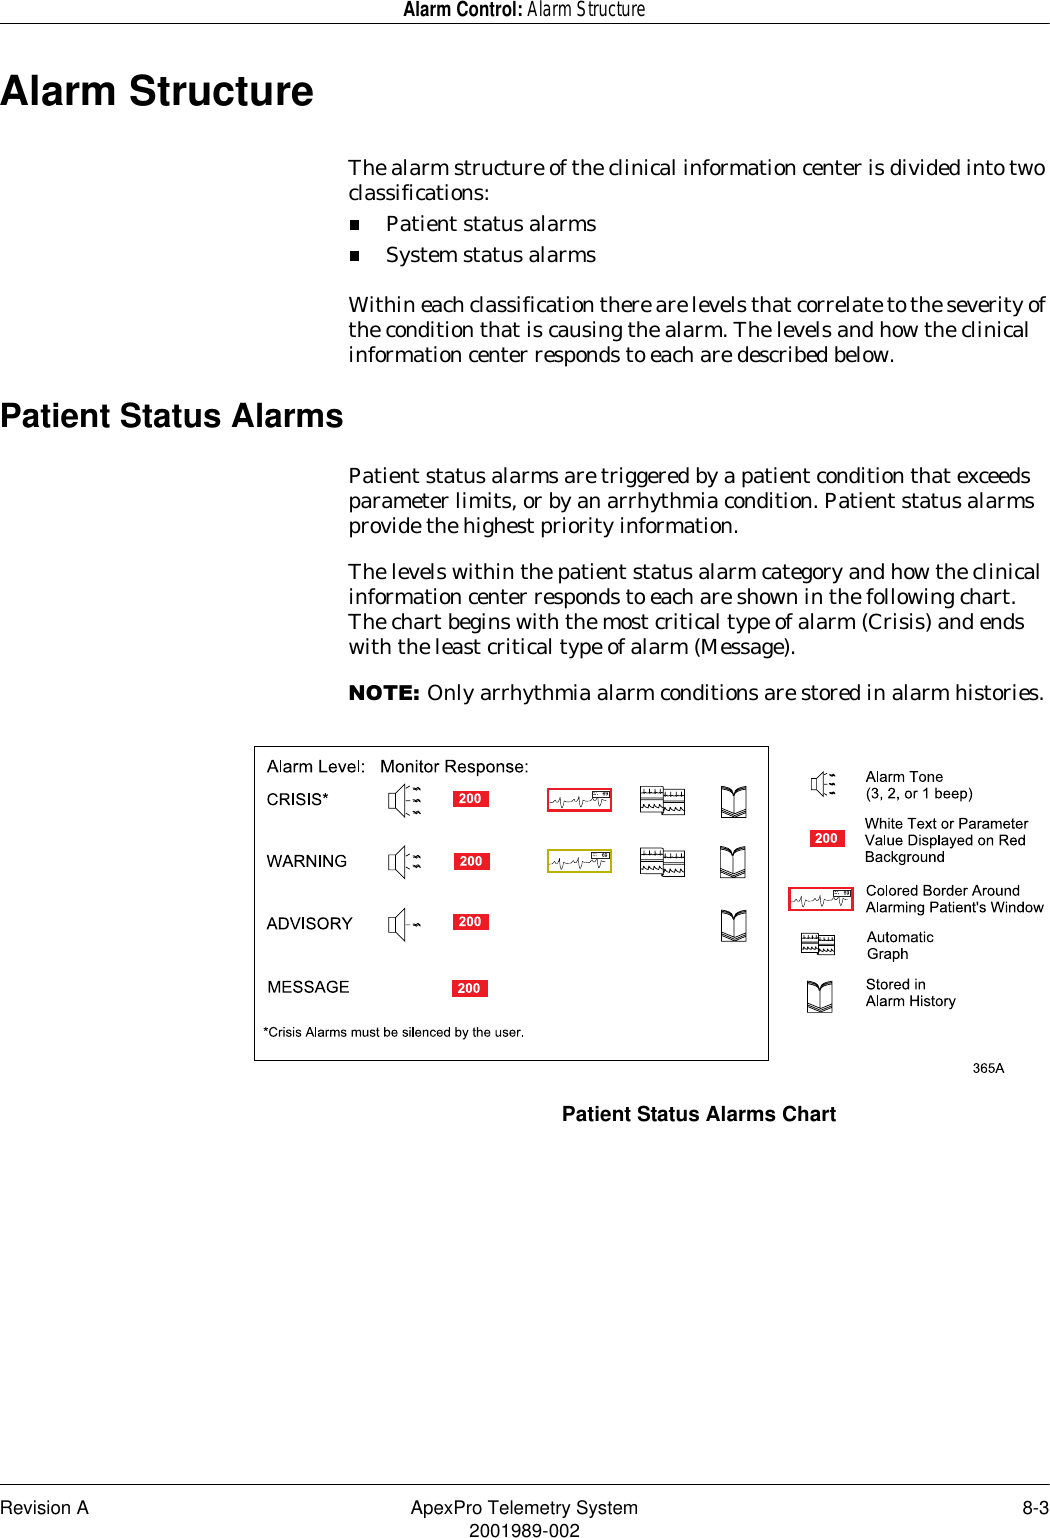 Revision A ApexPro Telemetry System 8-32001989-002Alarm Control: Alarm StructureAlarm StructureThe alarm structure of the clinical information center is divided into two classifications:Patient status alarmsSystem status alarmsWithin each classification there are levels that correlate to the severity of the condition that is causing the alarm. The levels and how the clinical information center responds to each are described below.Patient Status AlarmsPatient status alarms are triggered by a patient condition that exceeds parameter limits, or by an arrhythmia condition. Patient status alarms provide the highest priority information.The levels within the patient status alarm category and how the clinical information center responds to each are shown in the following chart. The chart begins with the most critical type of alarm (Crisis) and ends with the least critical type of alarm (Message).127(Only arrhythmia alarm conditions are stored in alarm histories.Patient Status Alarms Chart